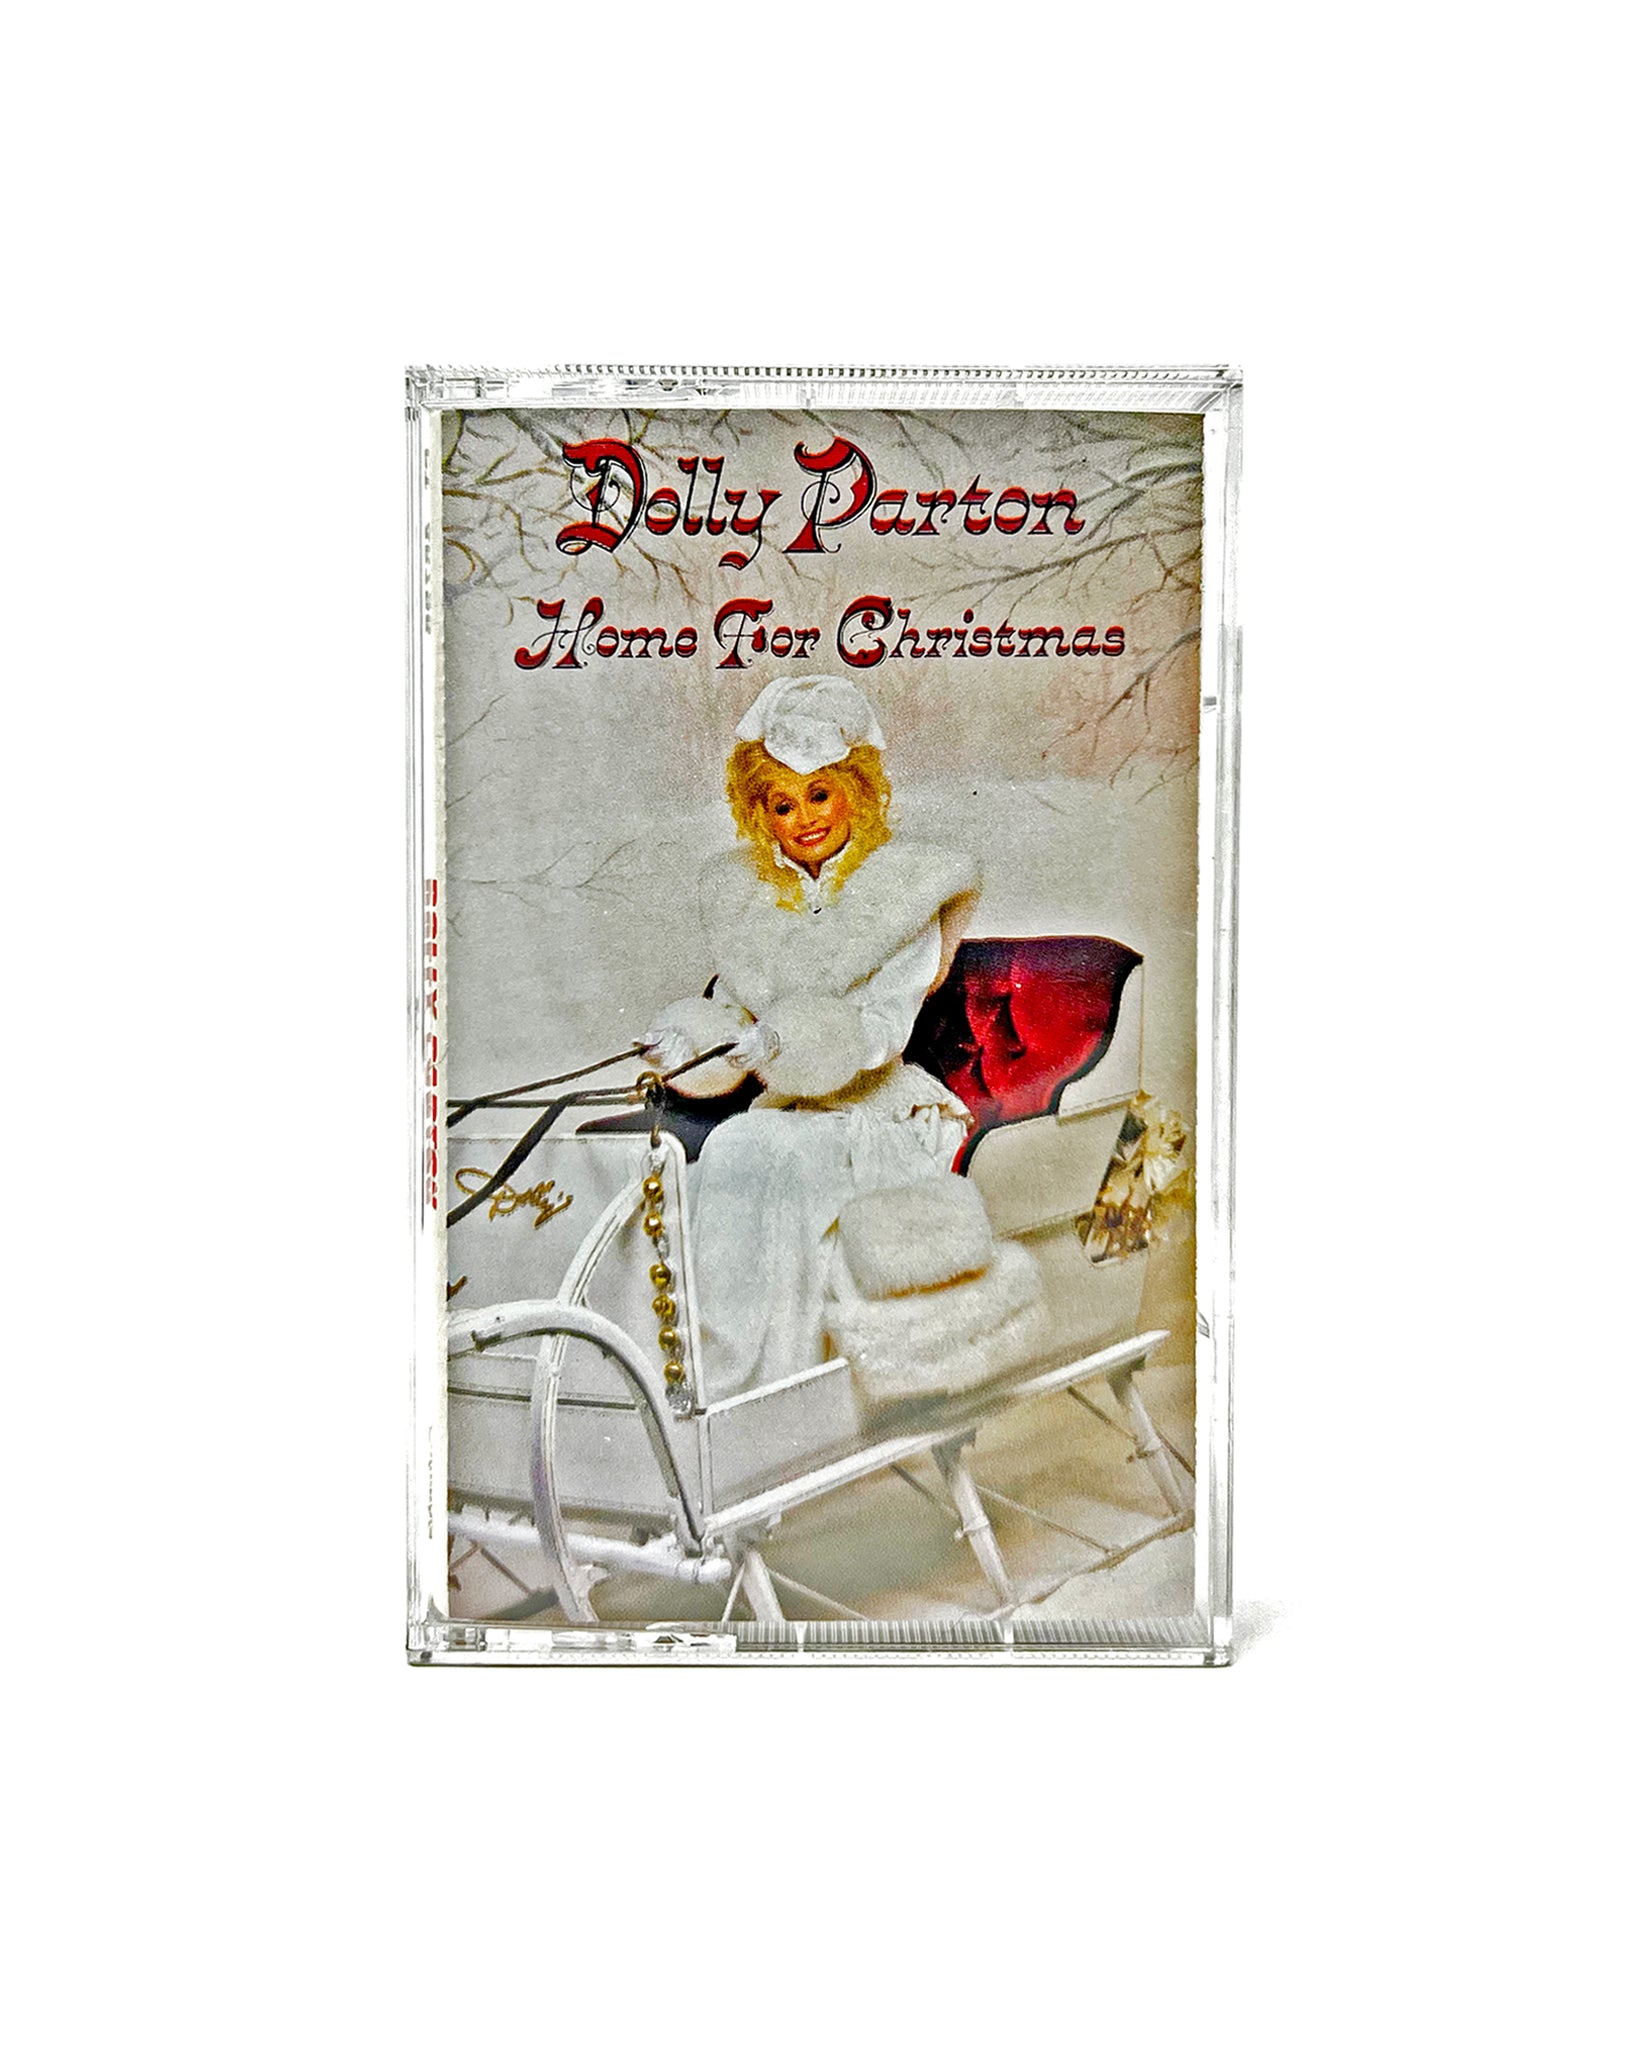 Vintage Holiday-Themed Cassette Tapes